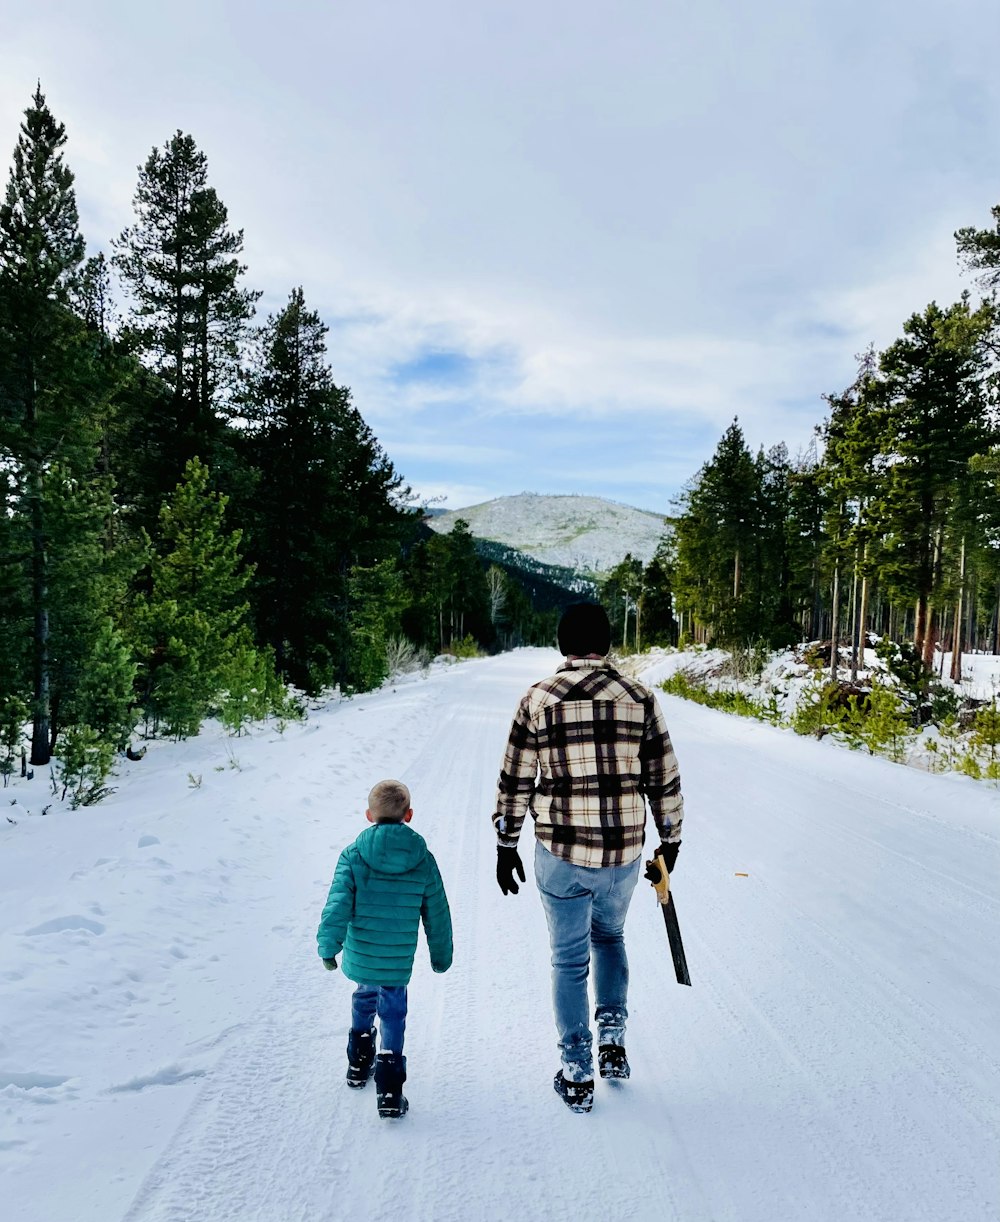 a man and a child walking on a snowy road